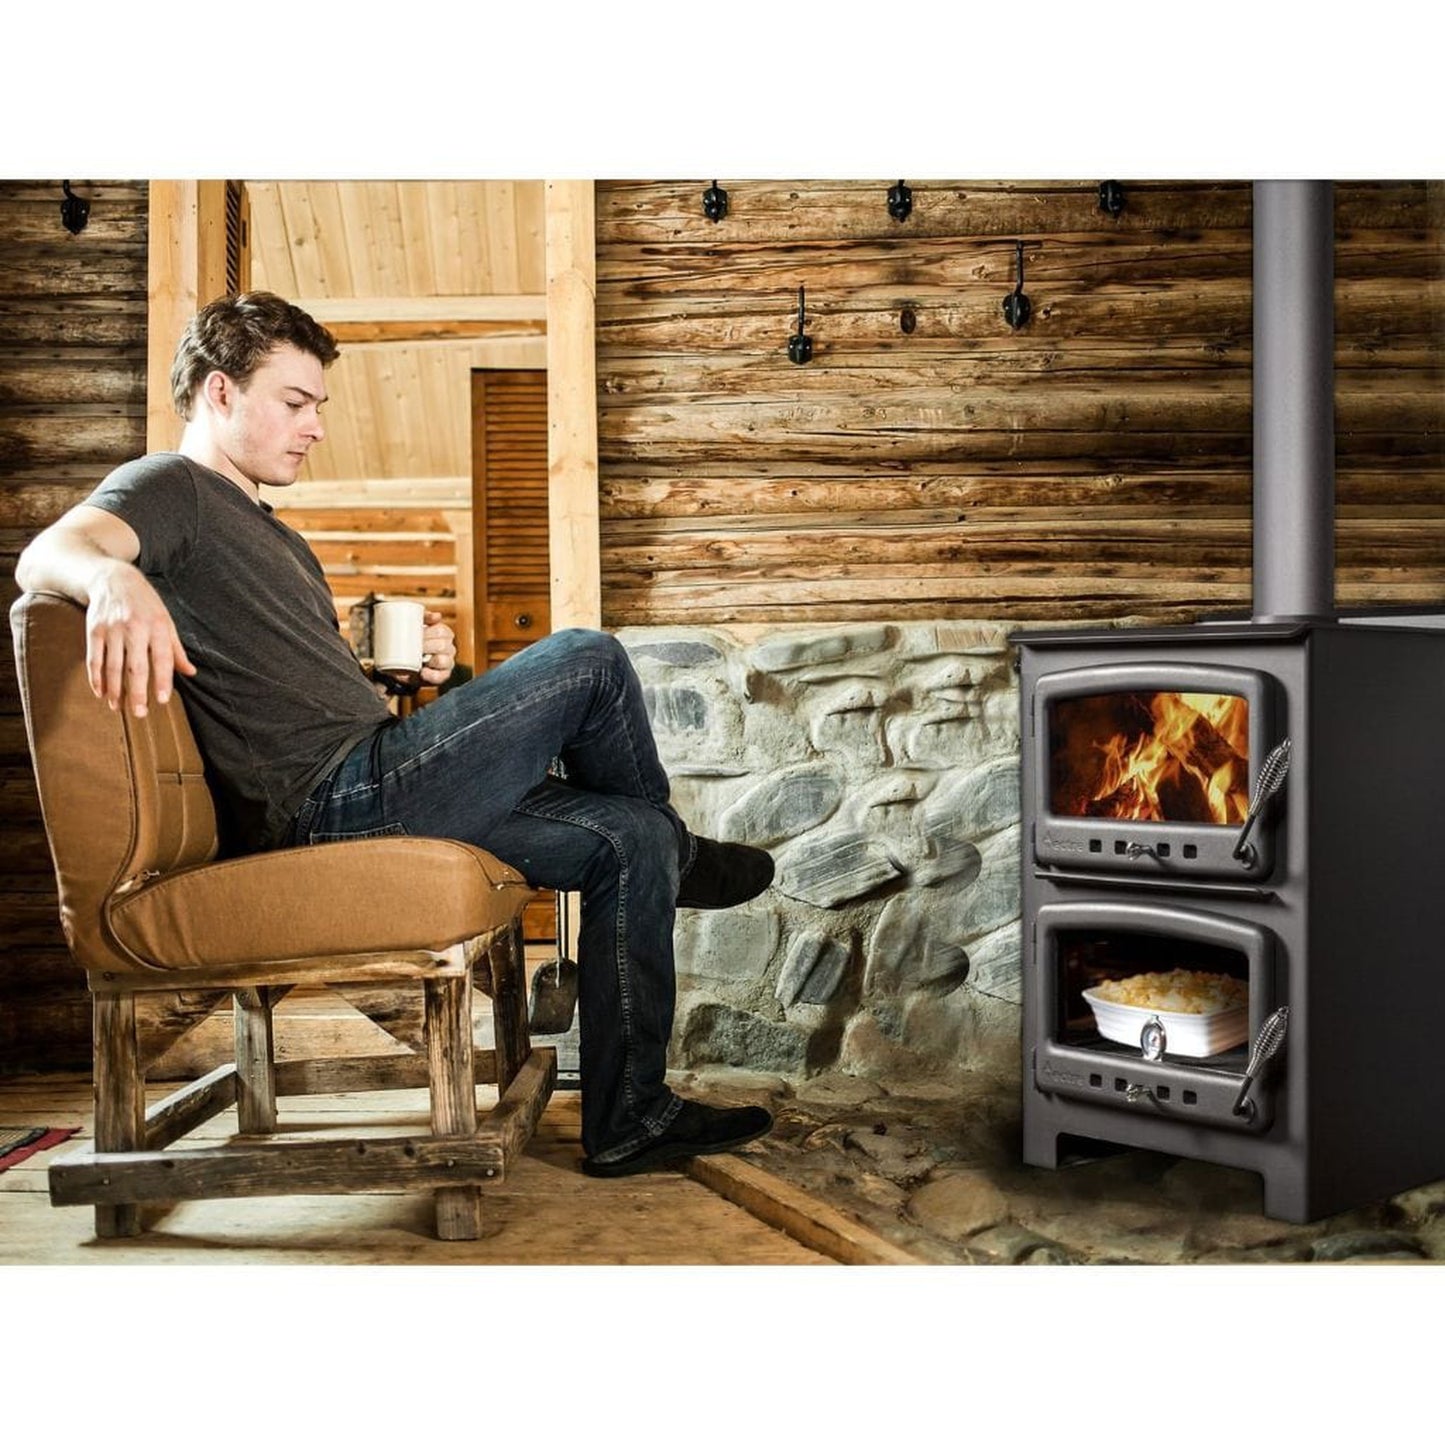 Nectre N350 Small Wood Cook Stove - Rocky Mountain Stove & Fireplace